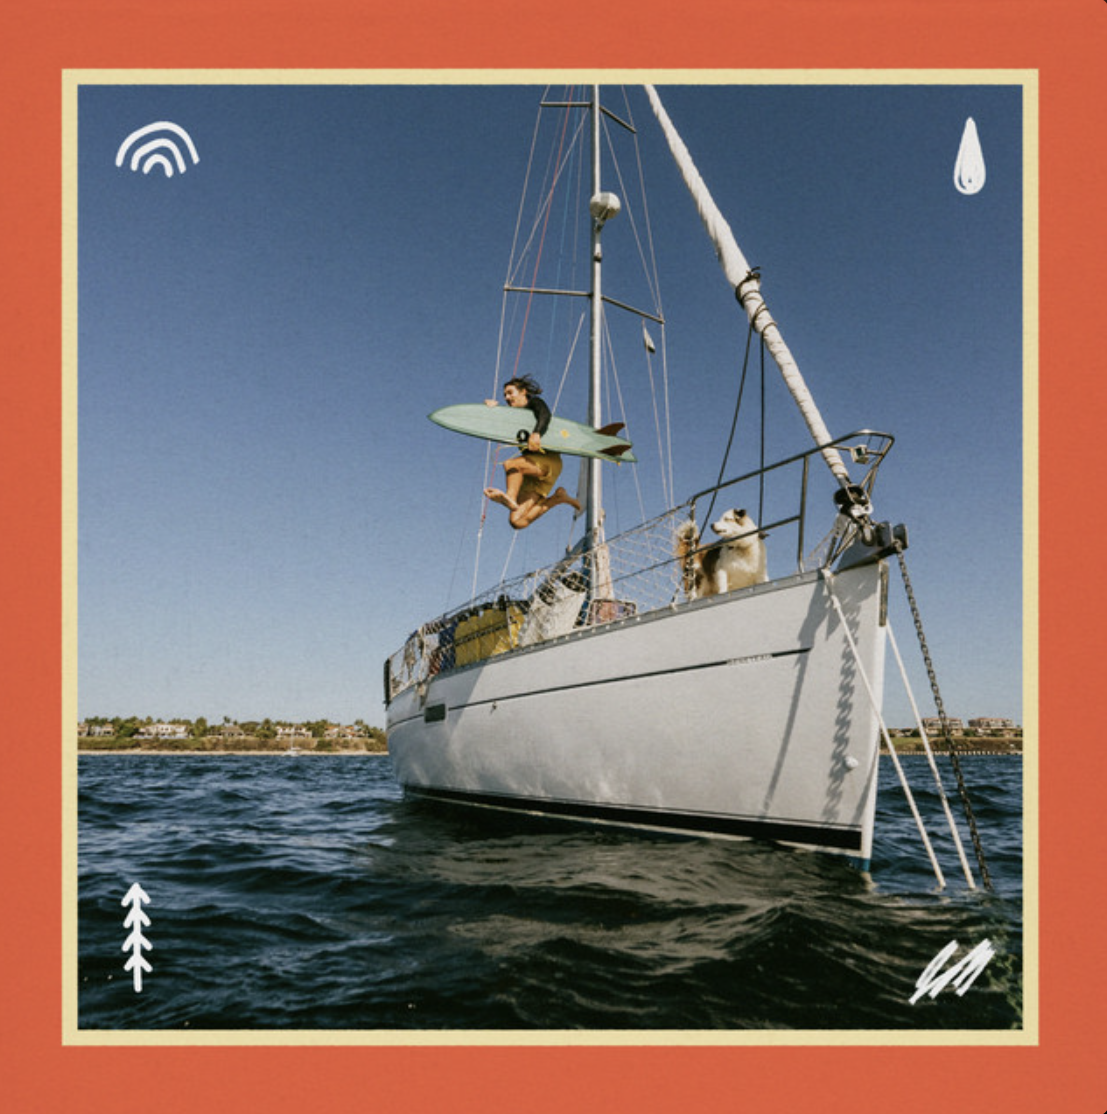 This image shows Goth Babe jumping off his sailboat into the ocean with a surfboard while his dog watches from on deck.